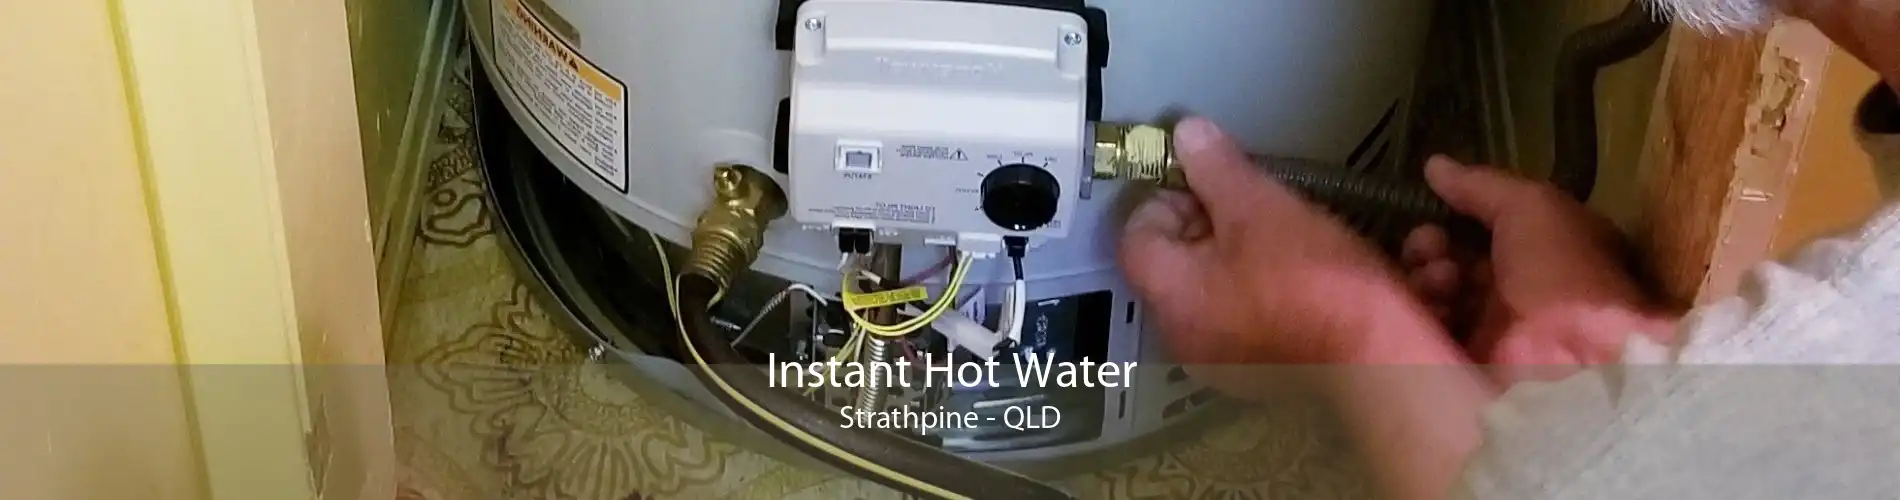 Instant Hot Water Strathpine - QLD